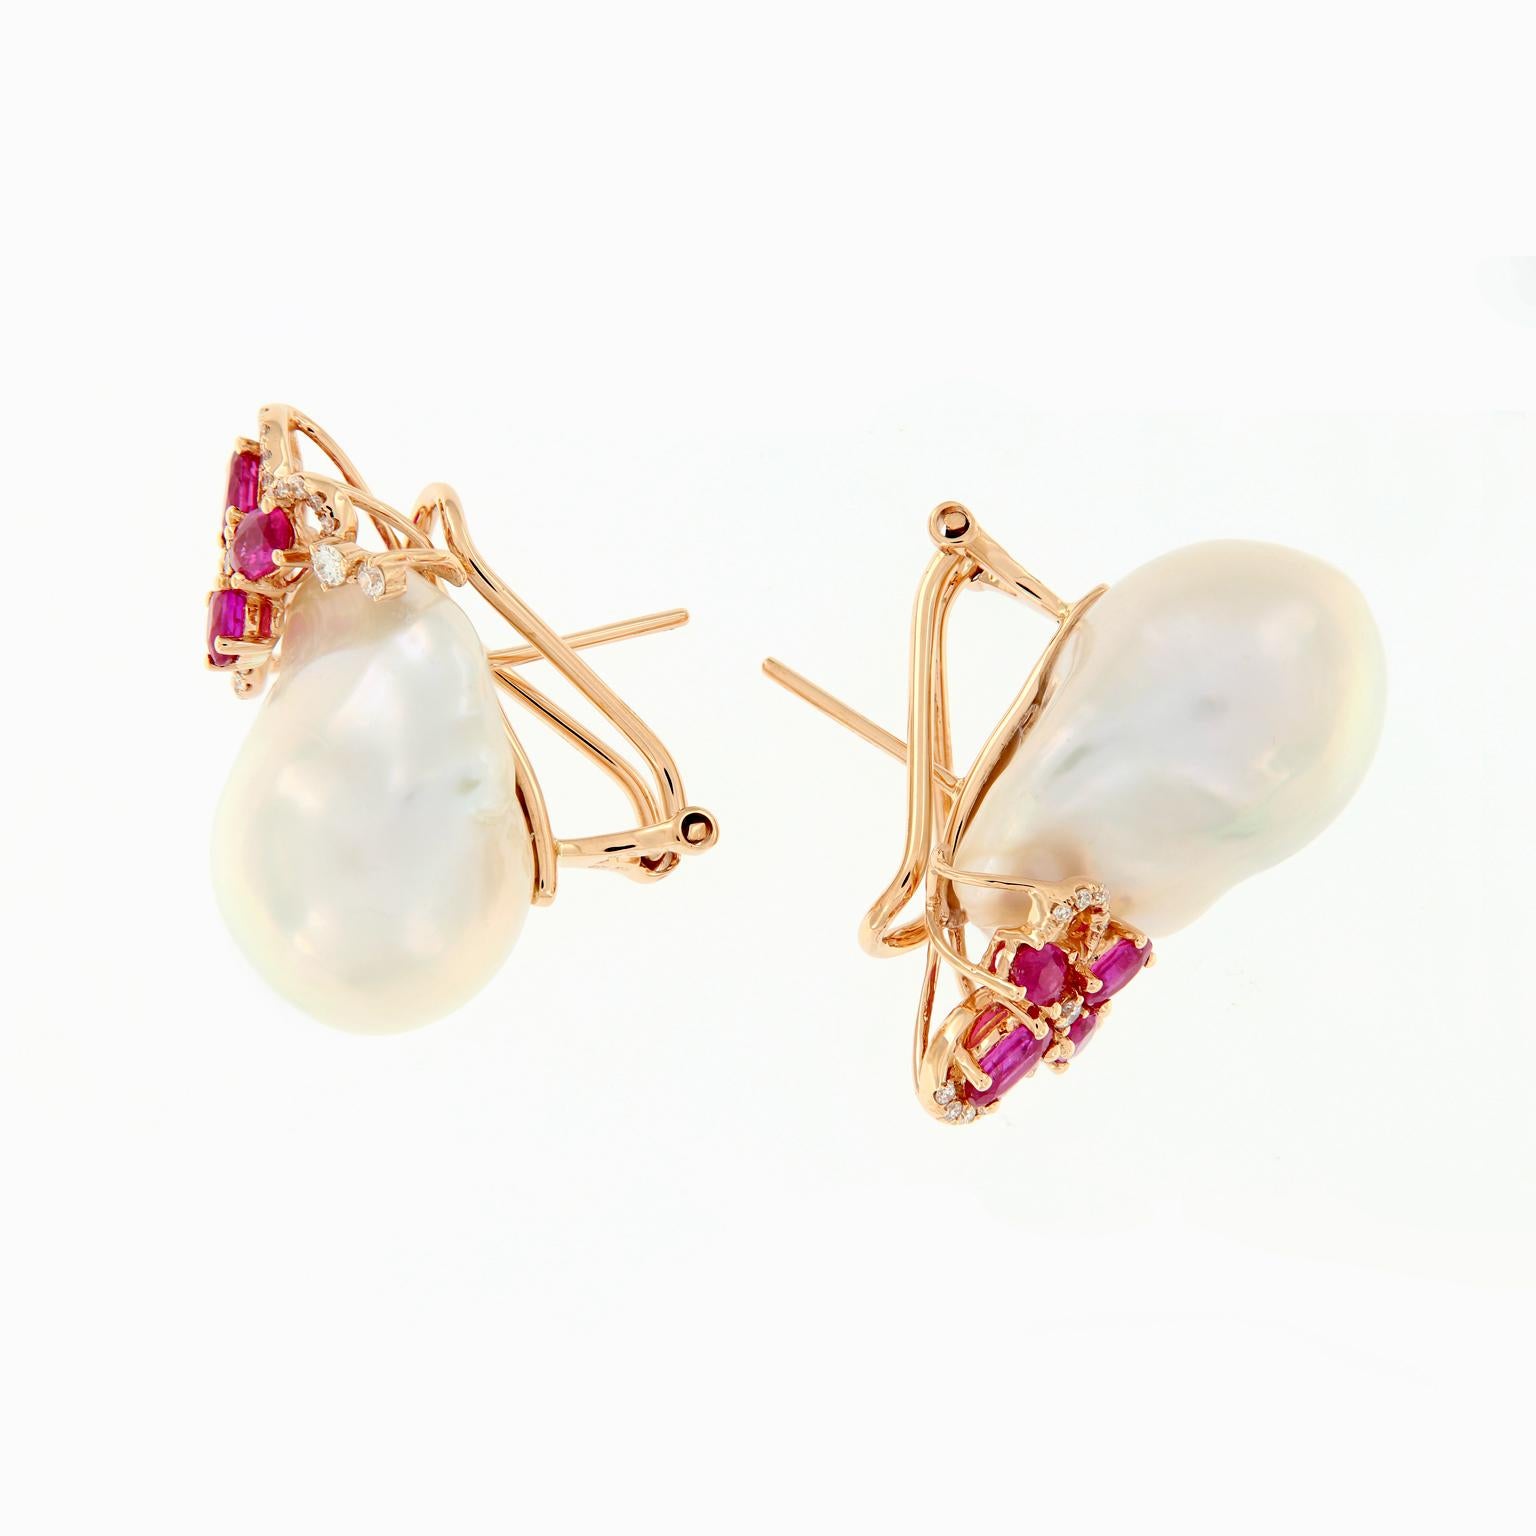 Lovely fresh water baroque pearl earrings feature a contemporary floral design of rubies and diamonds set in 18k rose gold. Weigh 18.9 grams.

Diamonds 0.29 cttw
Rubies 1.82 cttw 